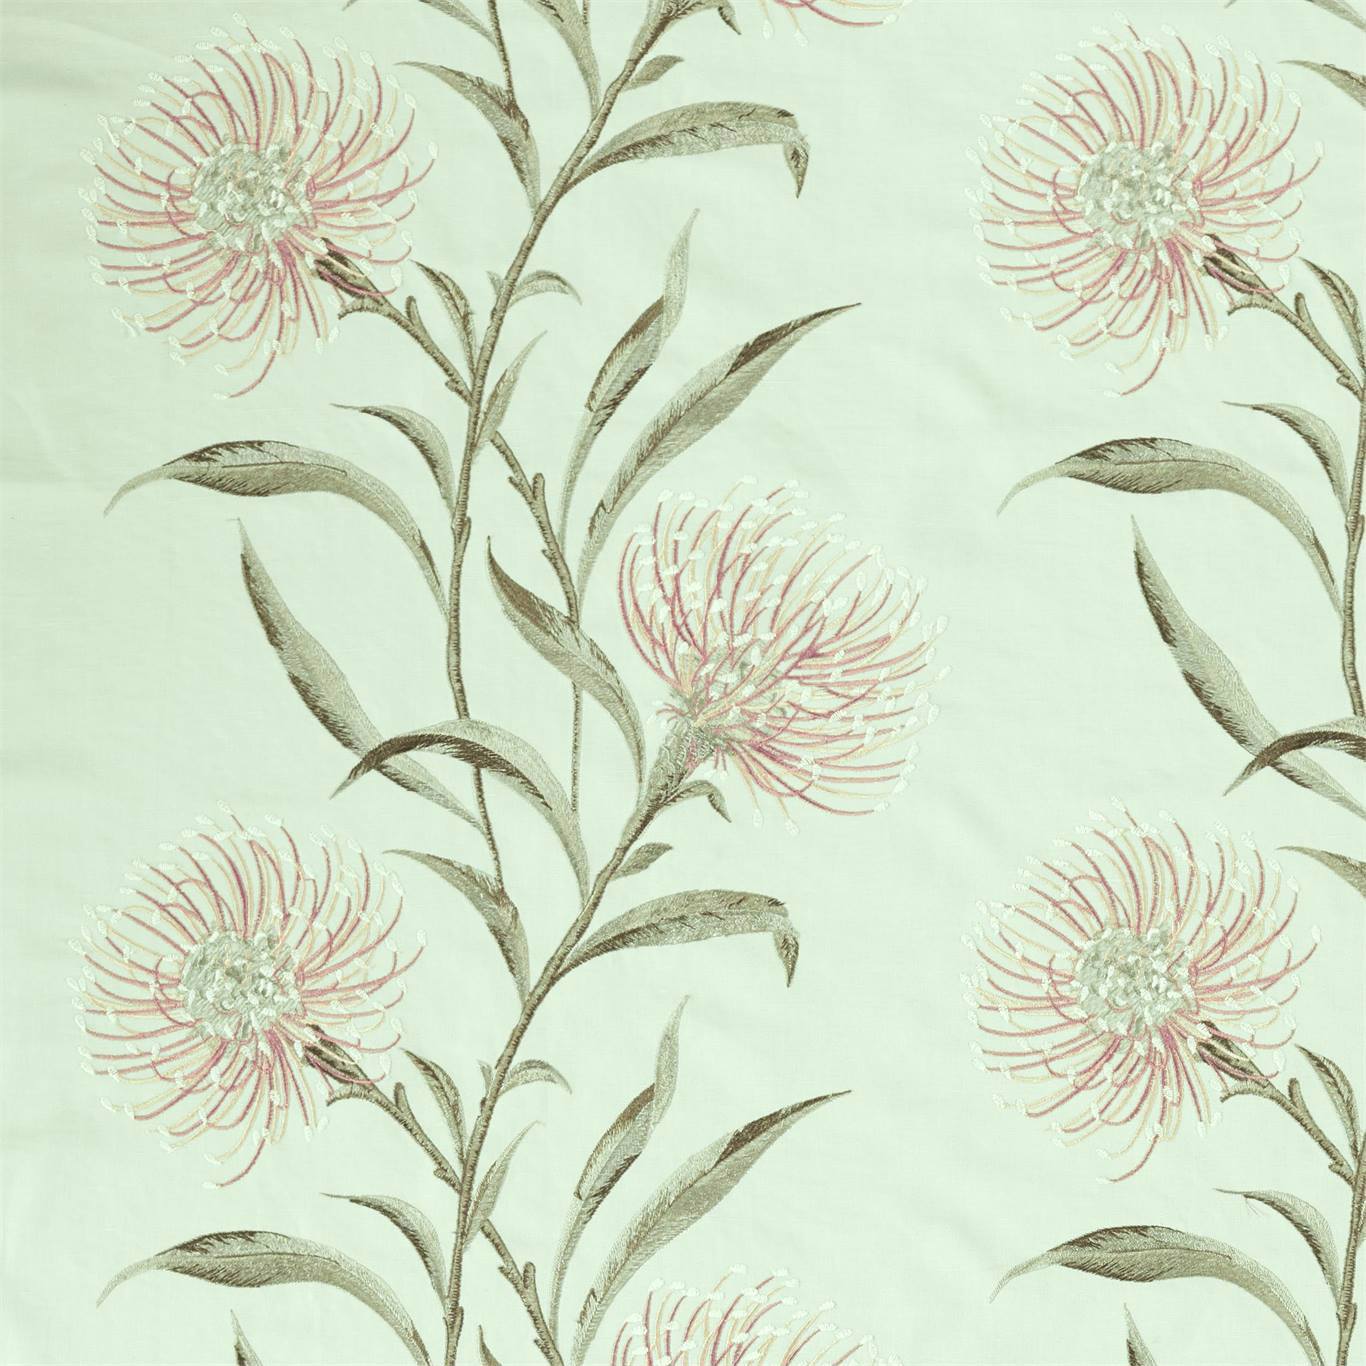 Catherinae Embroidery Fabric